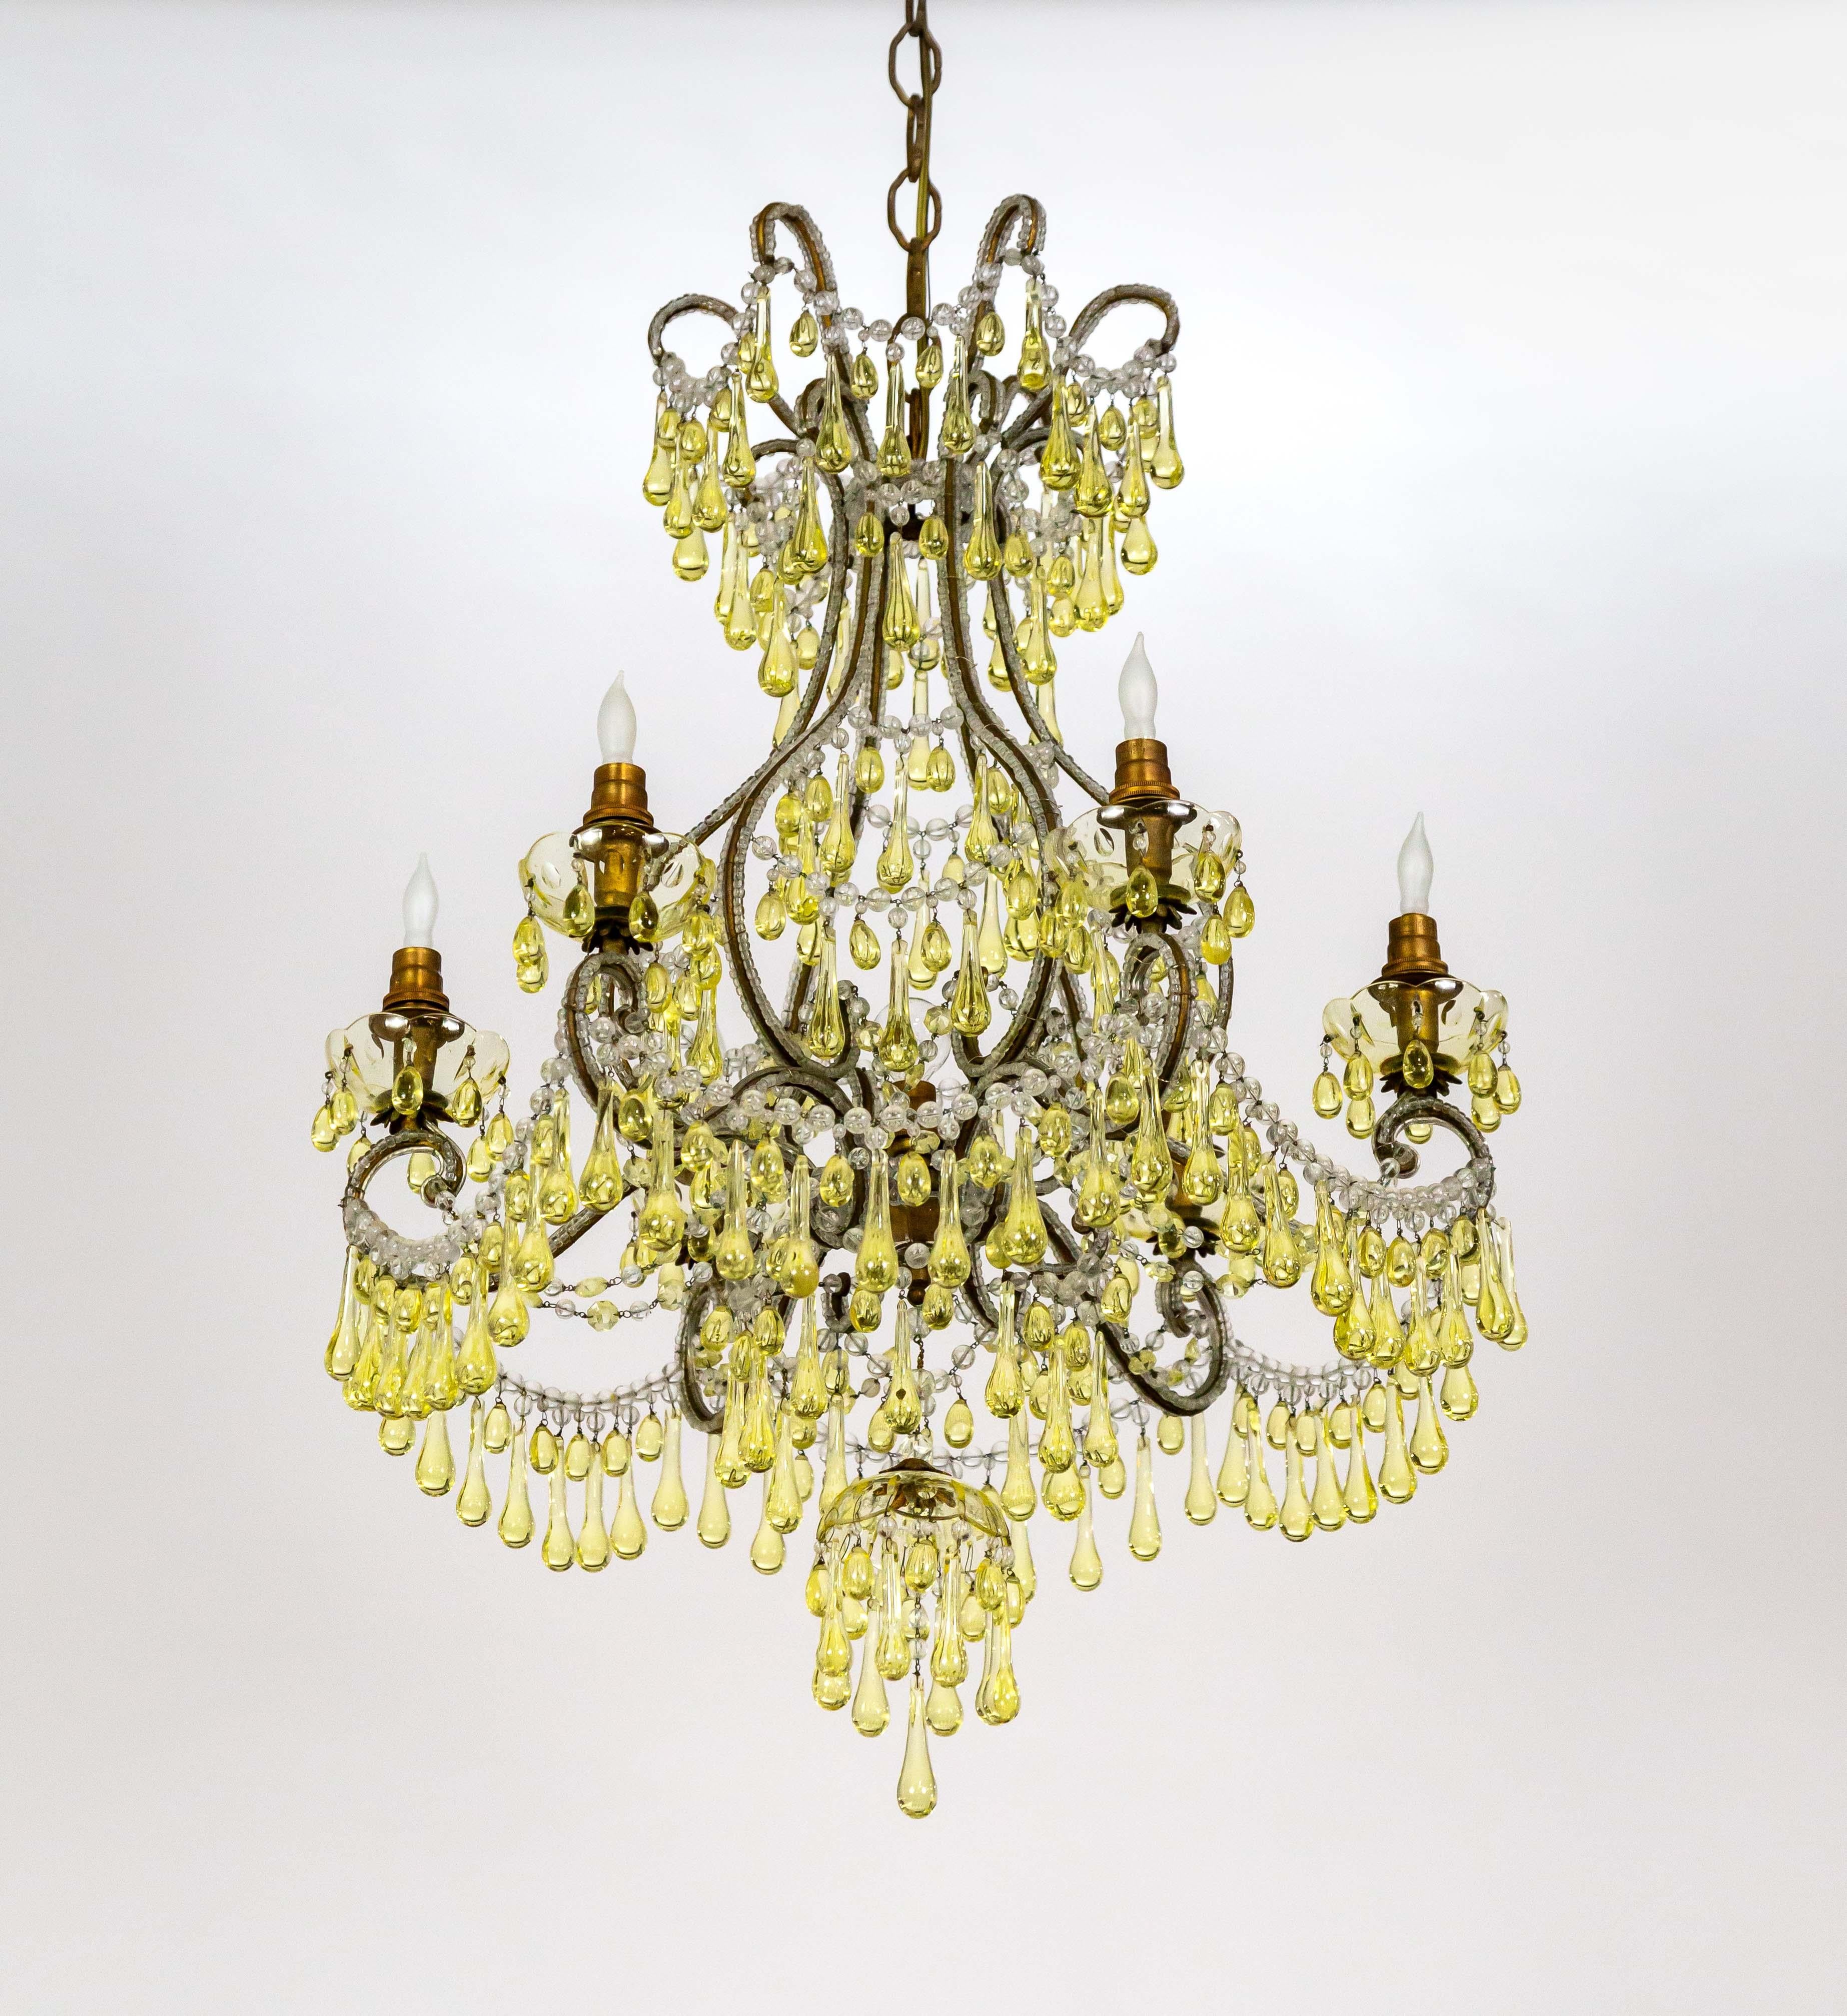 This stunning chandelier with rare pale-yellow bobeches and drop crystals was made circa the mid-1800s and was originally lit with candles. We electrified it with 6 lights on the arms and one center light. It has beaded strands along the arms,